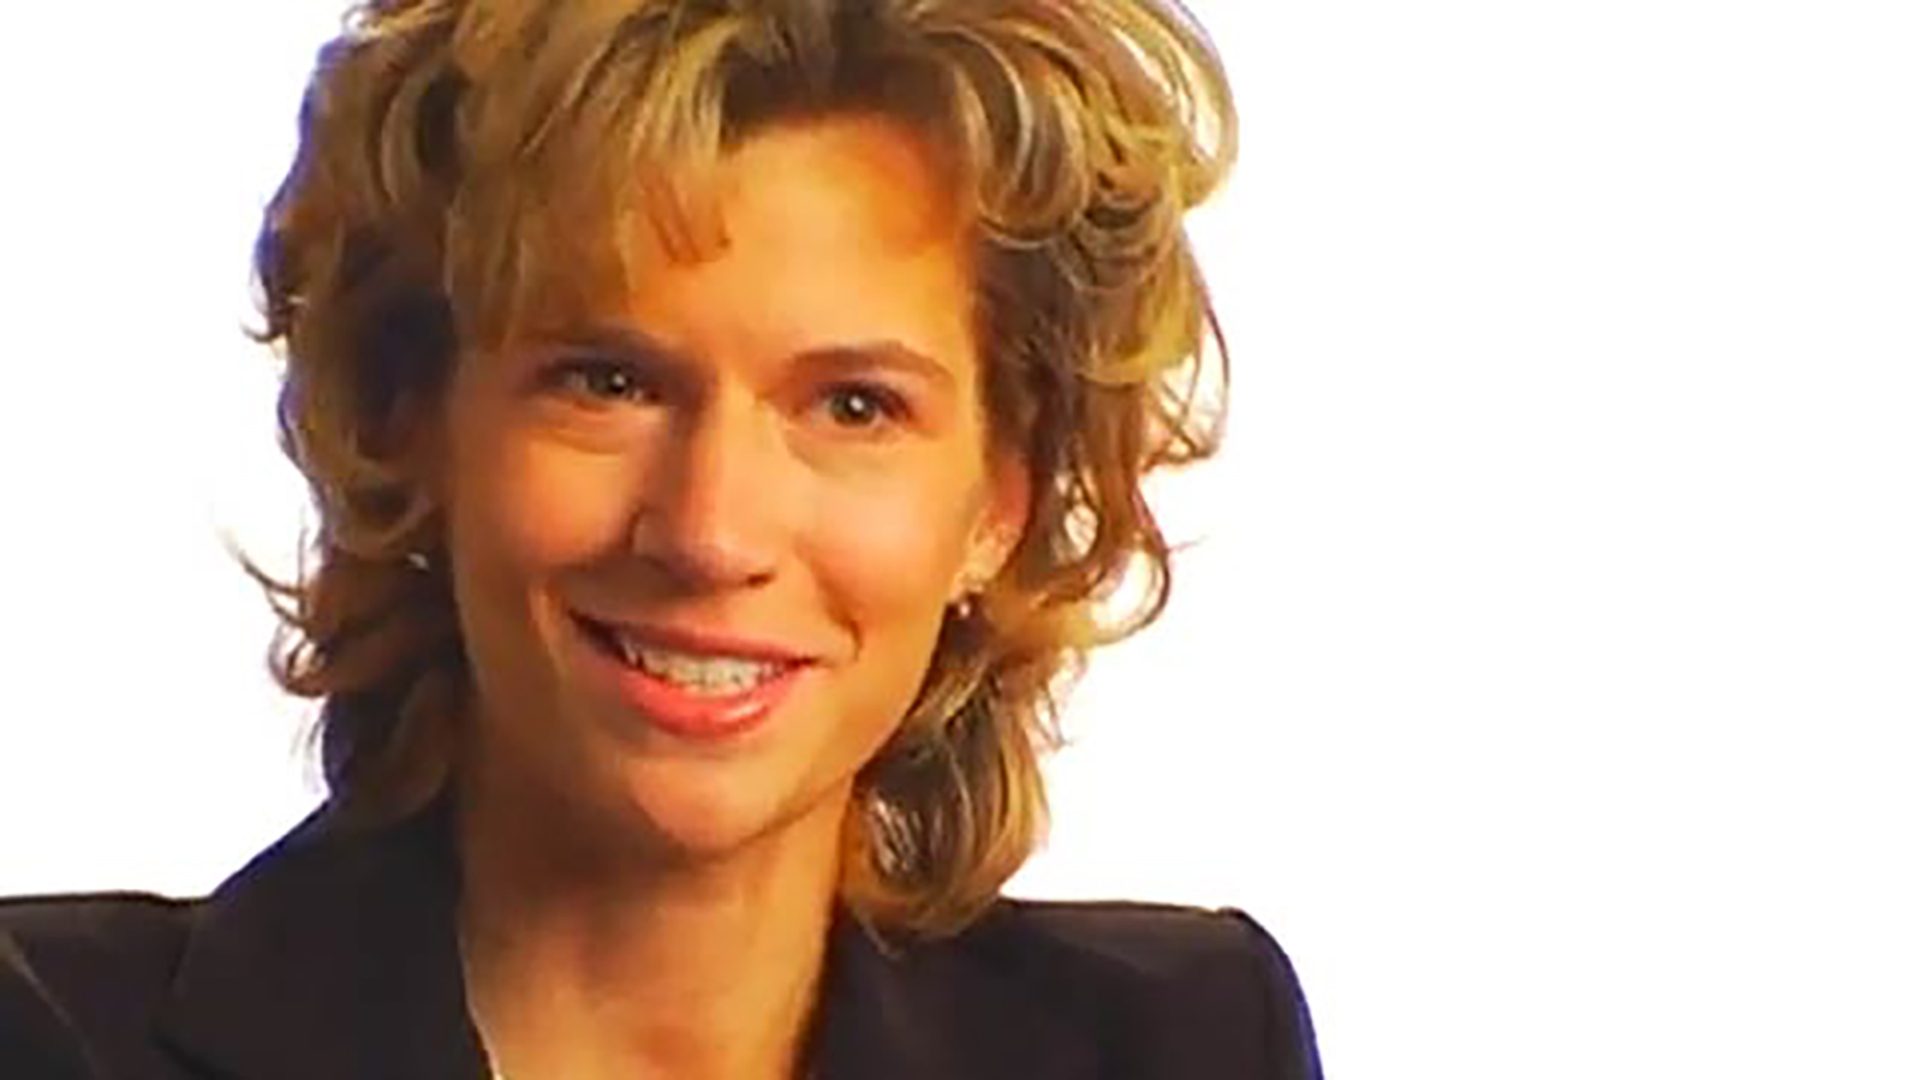 A woman with curly blonde hair wearing a blazer is interviewed against a white background.